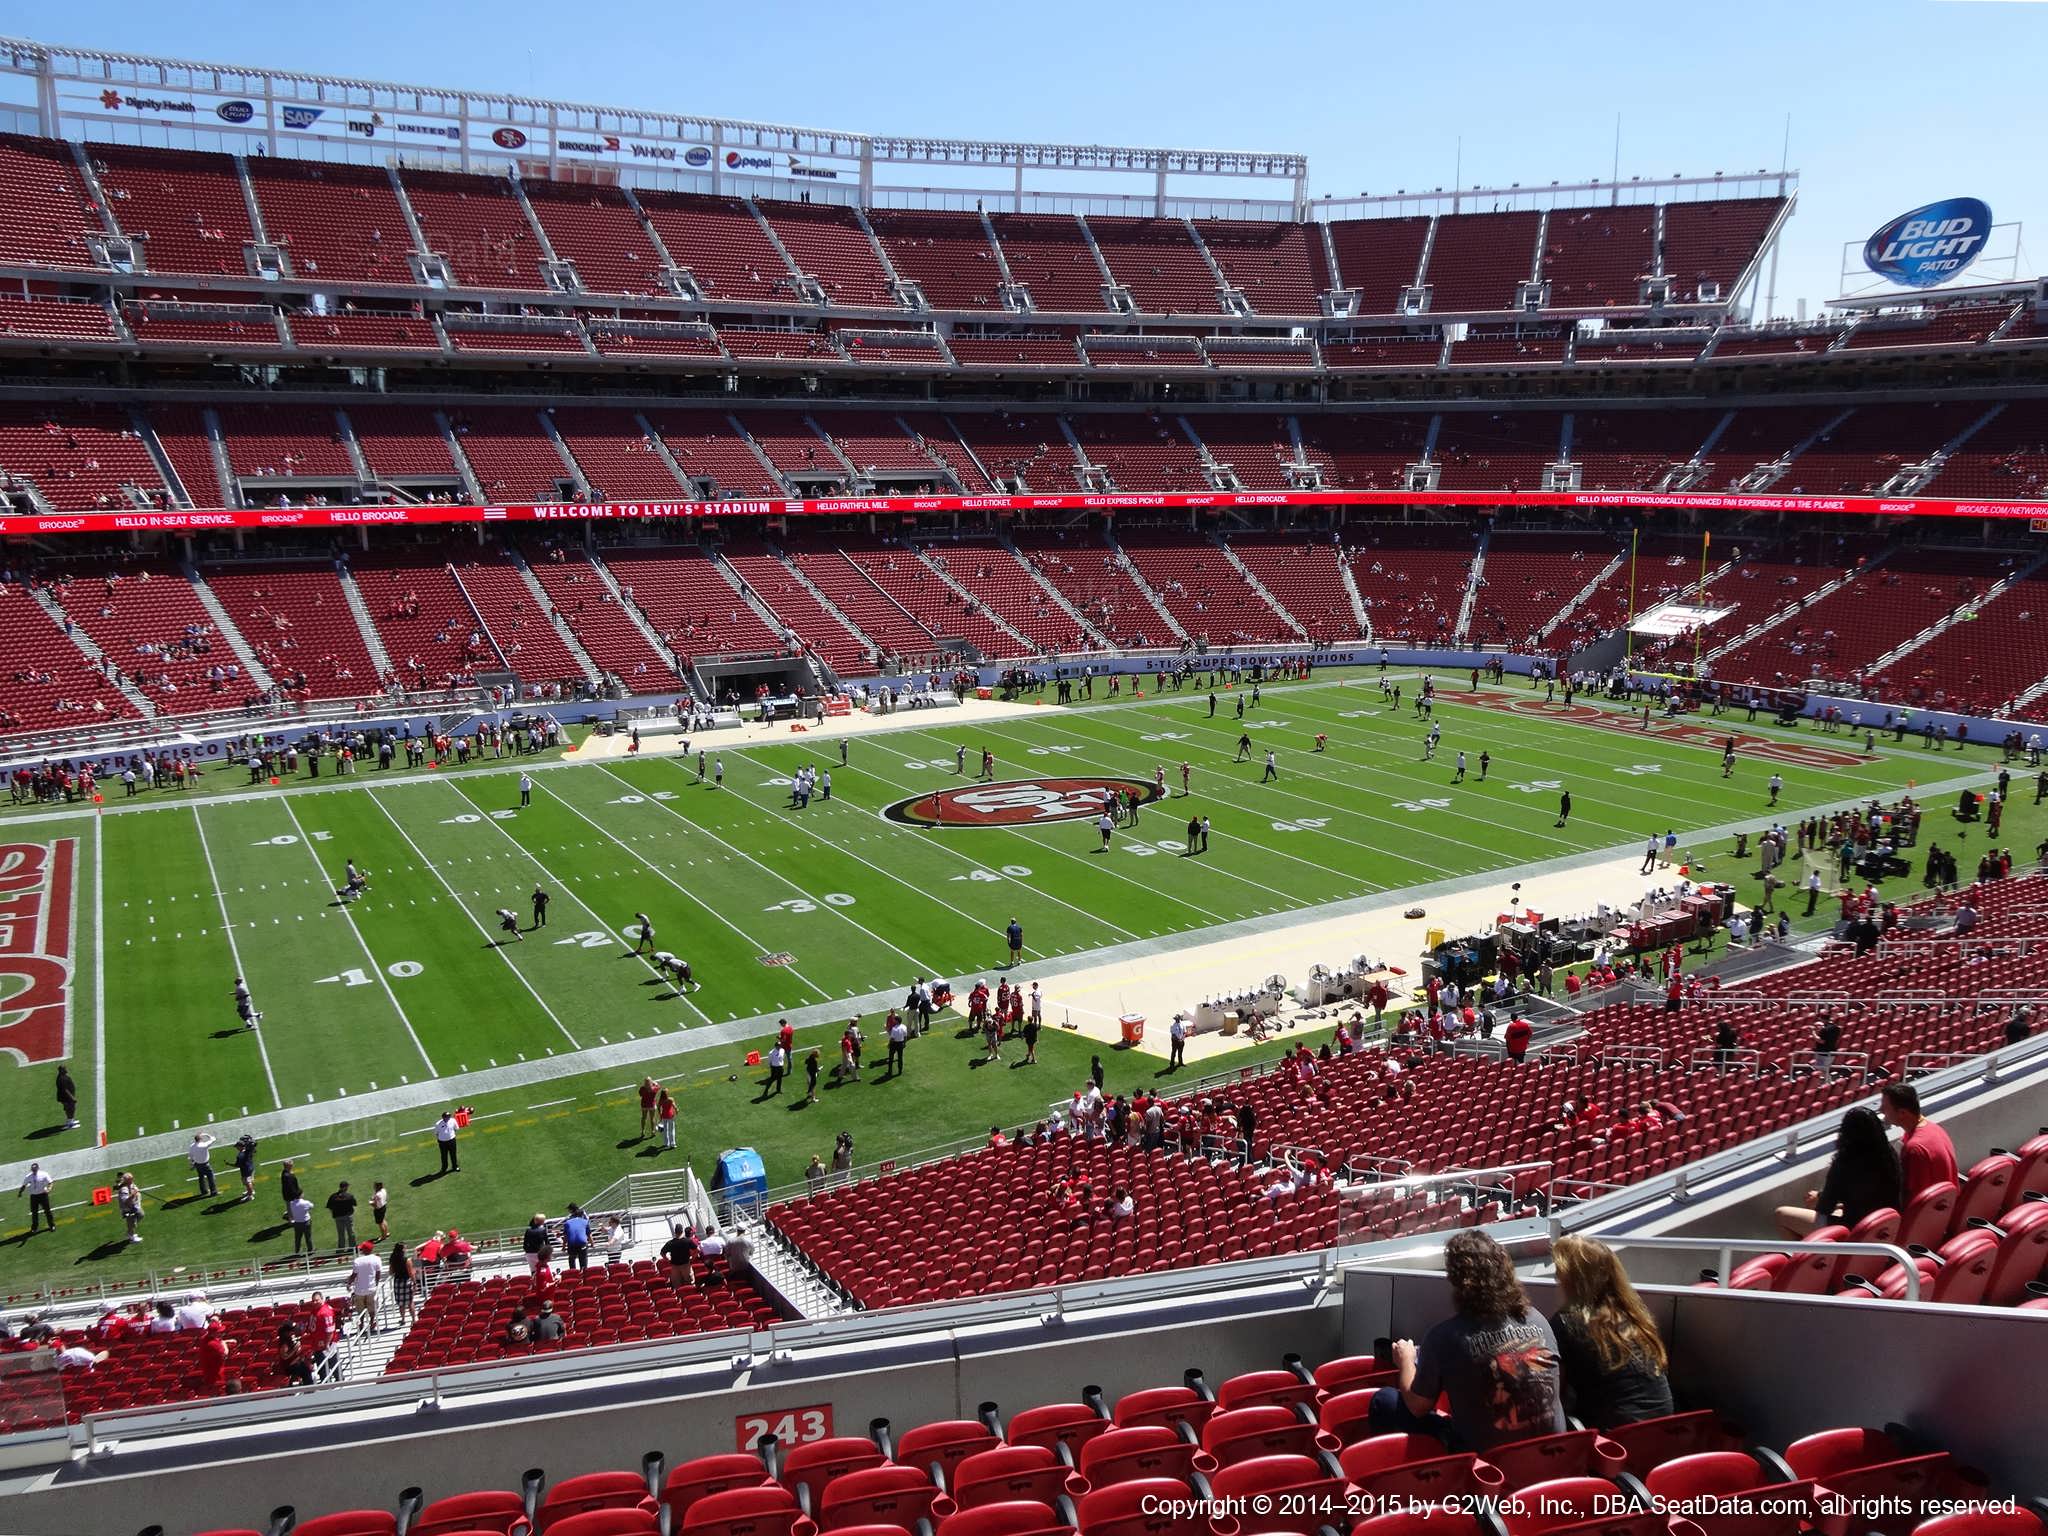 Seat view from section 243 at Levi’s Stadium, home of the San Francisco 49ers